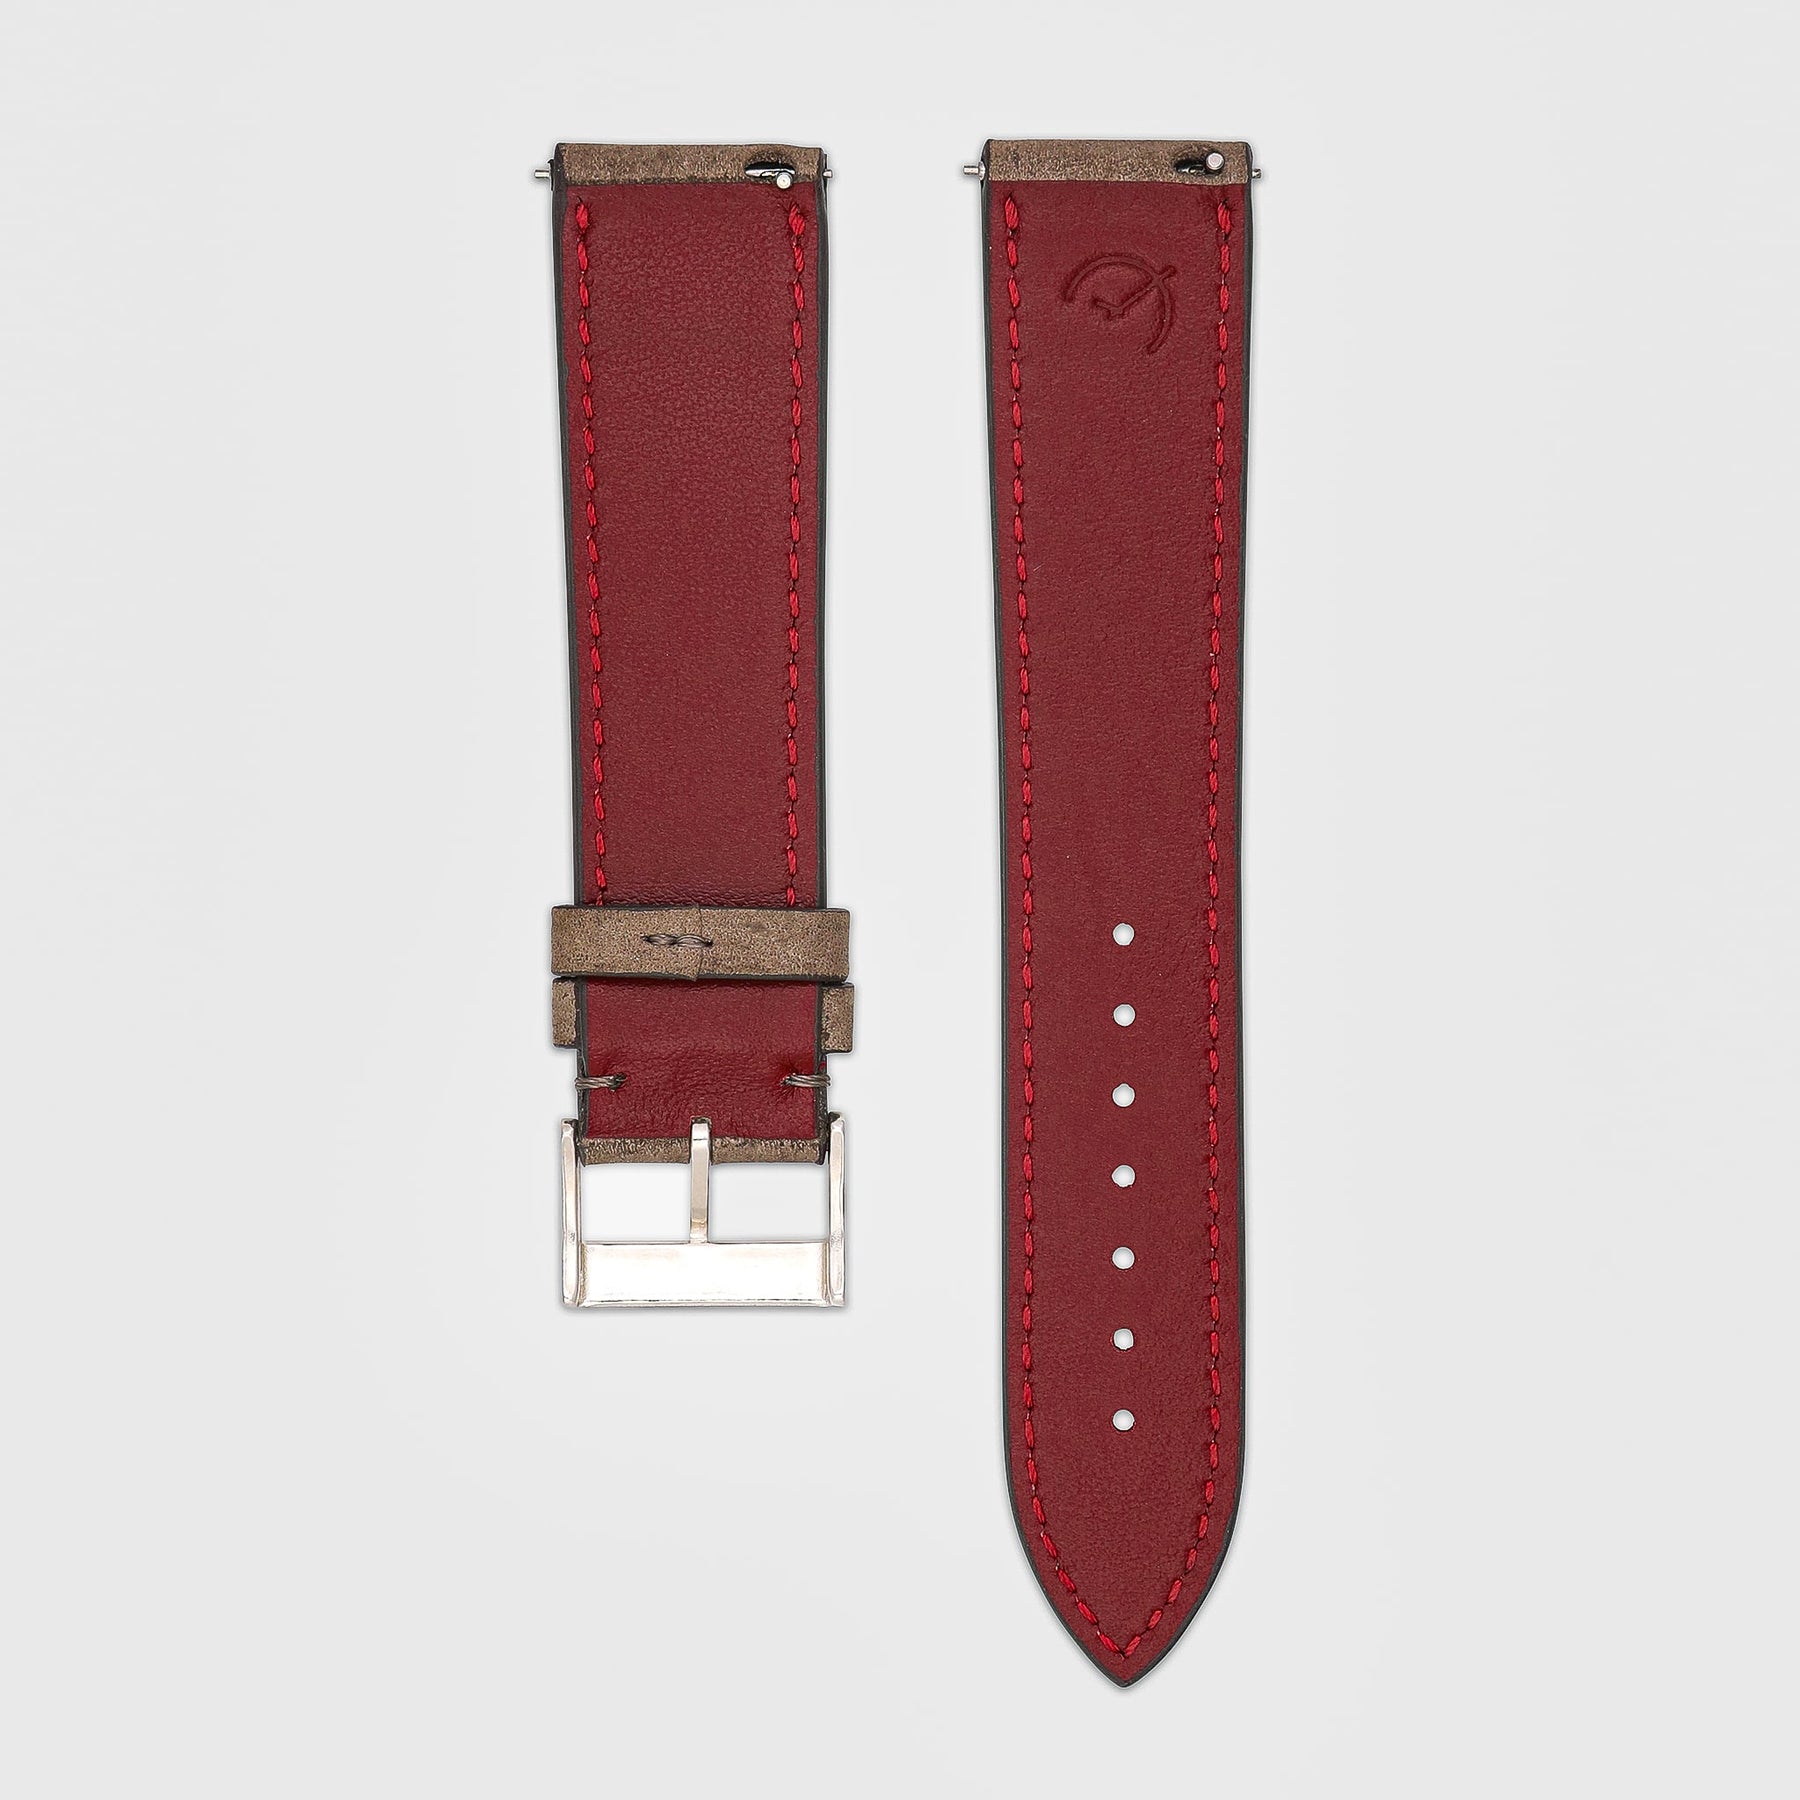 Coral: Taupe Kudu Leather Strap